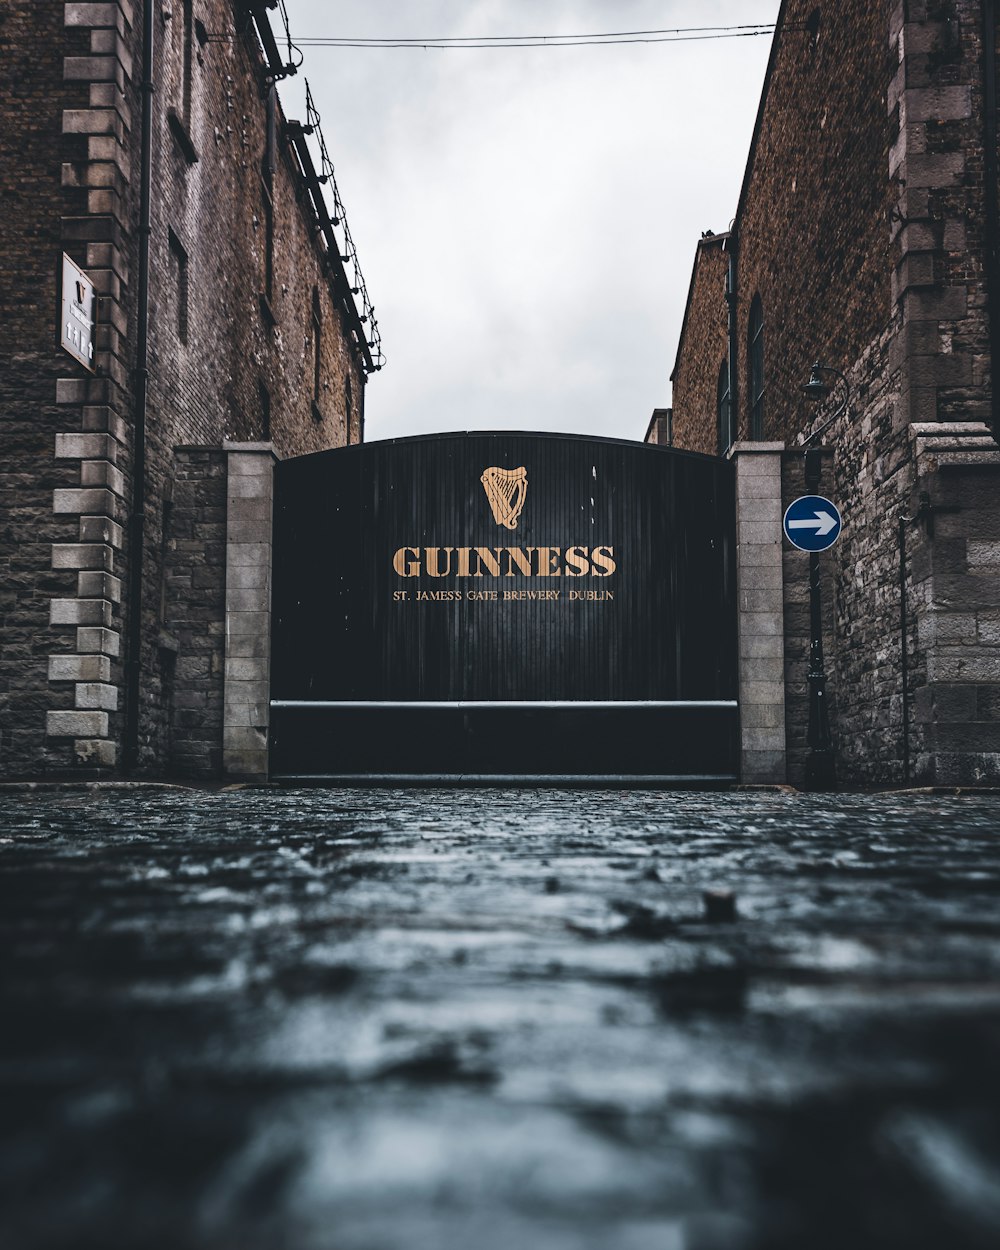 a guinness sign on the side of a building